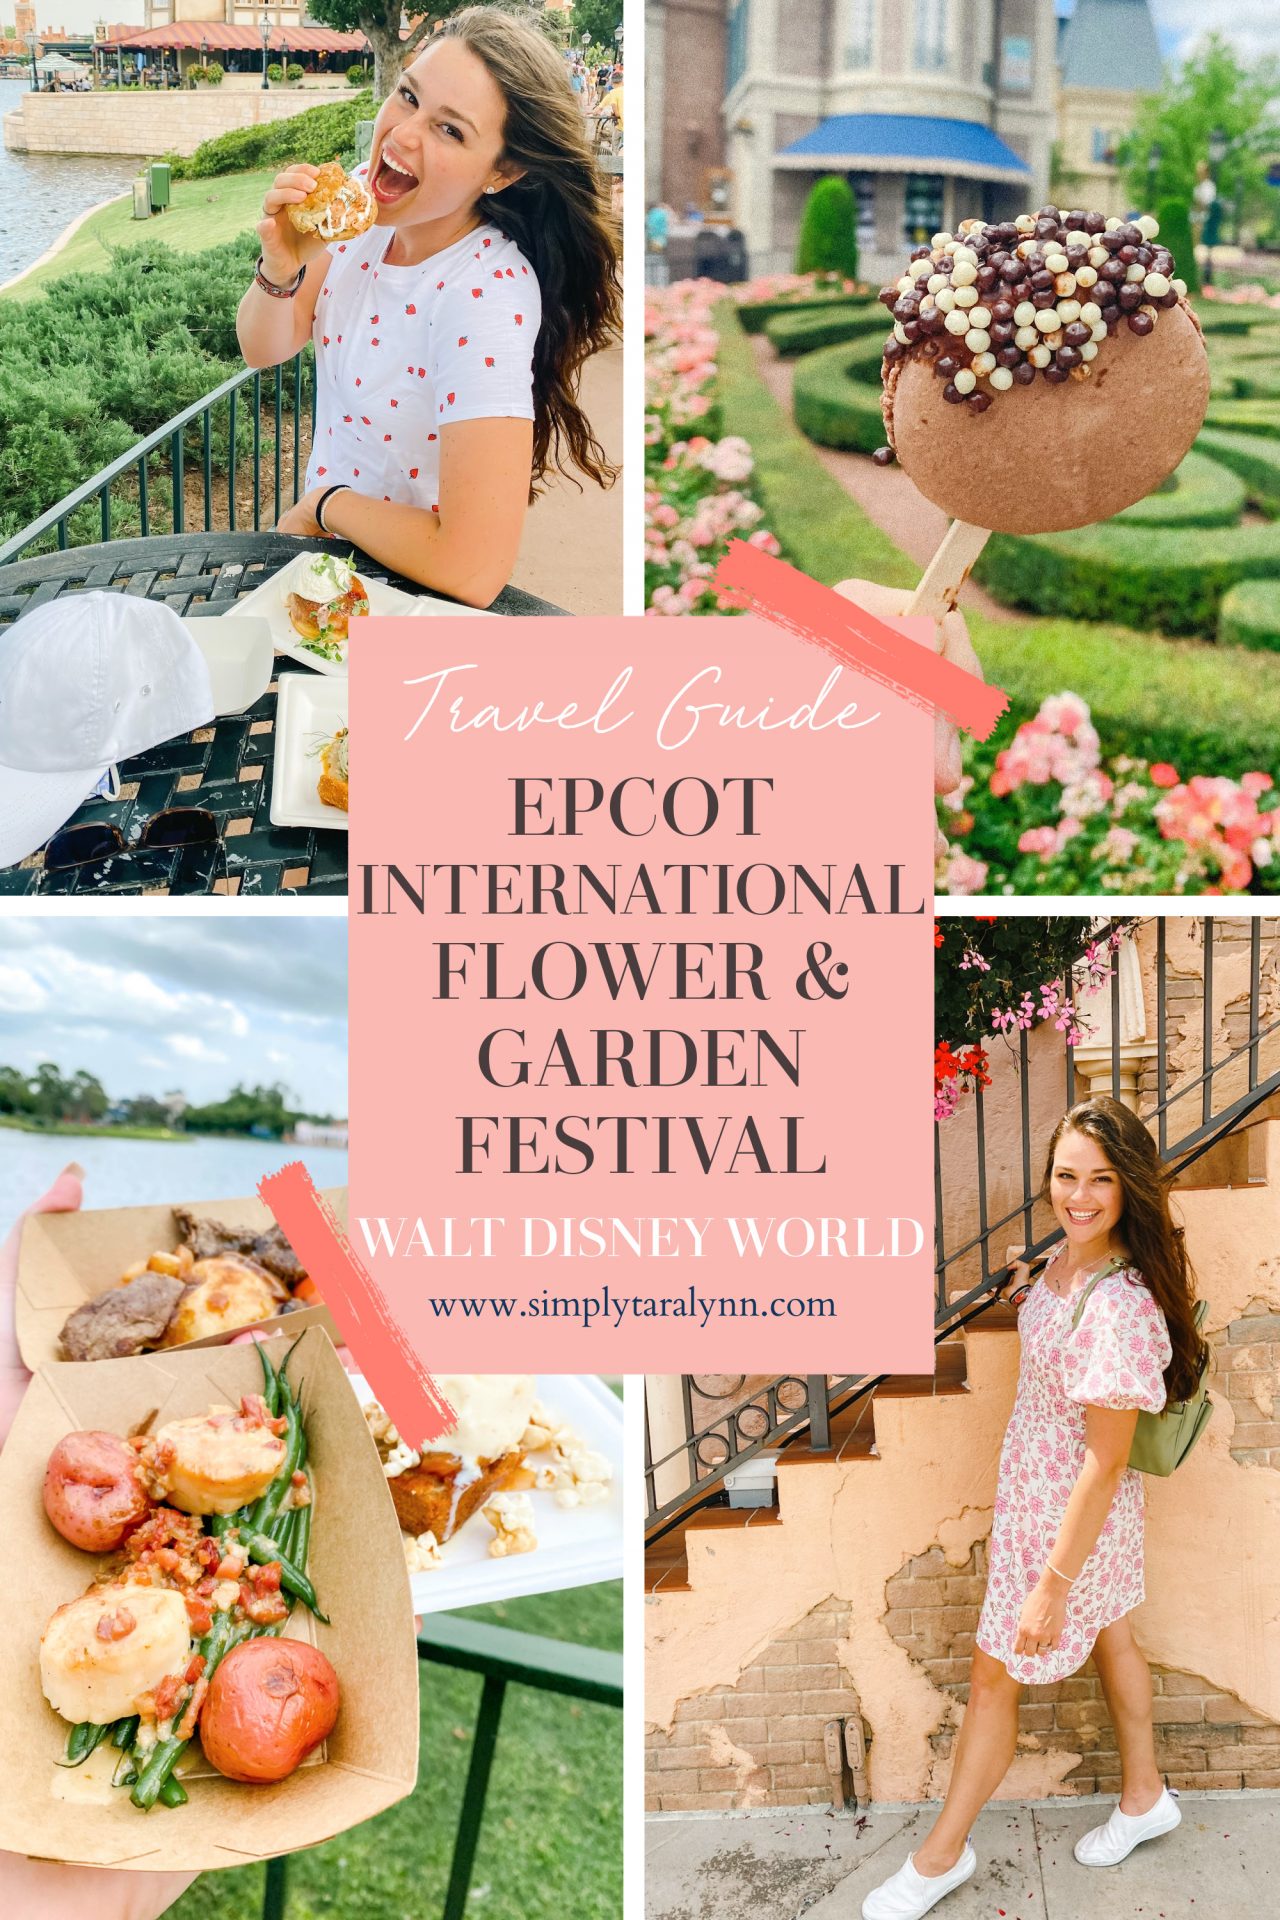 Epcot, drinks, food, Walt Disney World, Flower and Garden Festival, What We Ate At Epcot 2021, travel guide, Orlando Florida, Epcot blog, what is good at Epcot, what to get at Epcot, flowers, ultimate travel guide to walt disney world, skyliner, parks, park hopper,